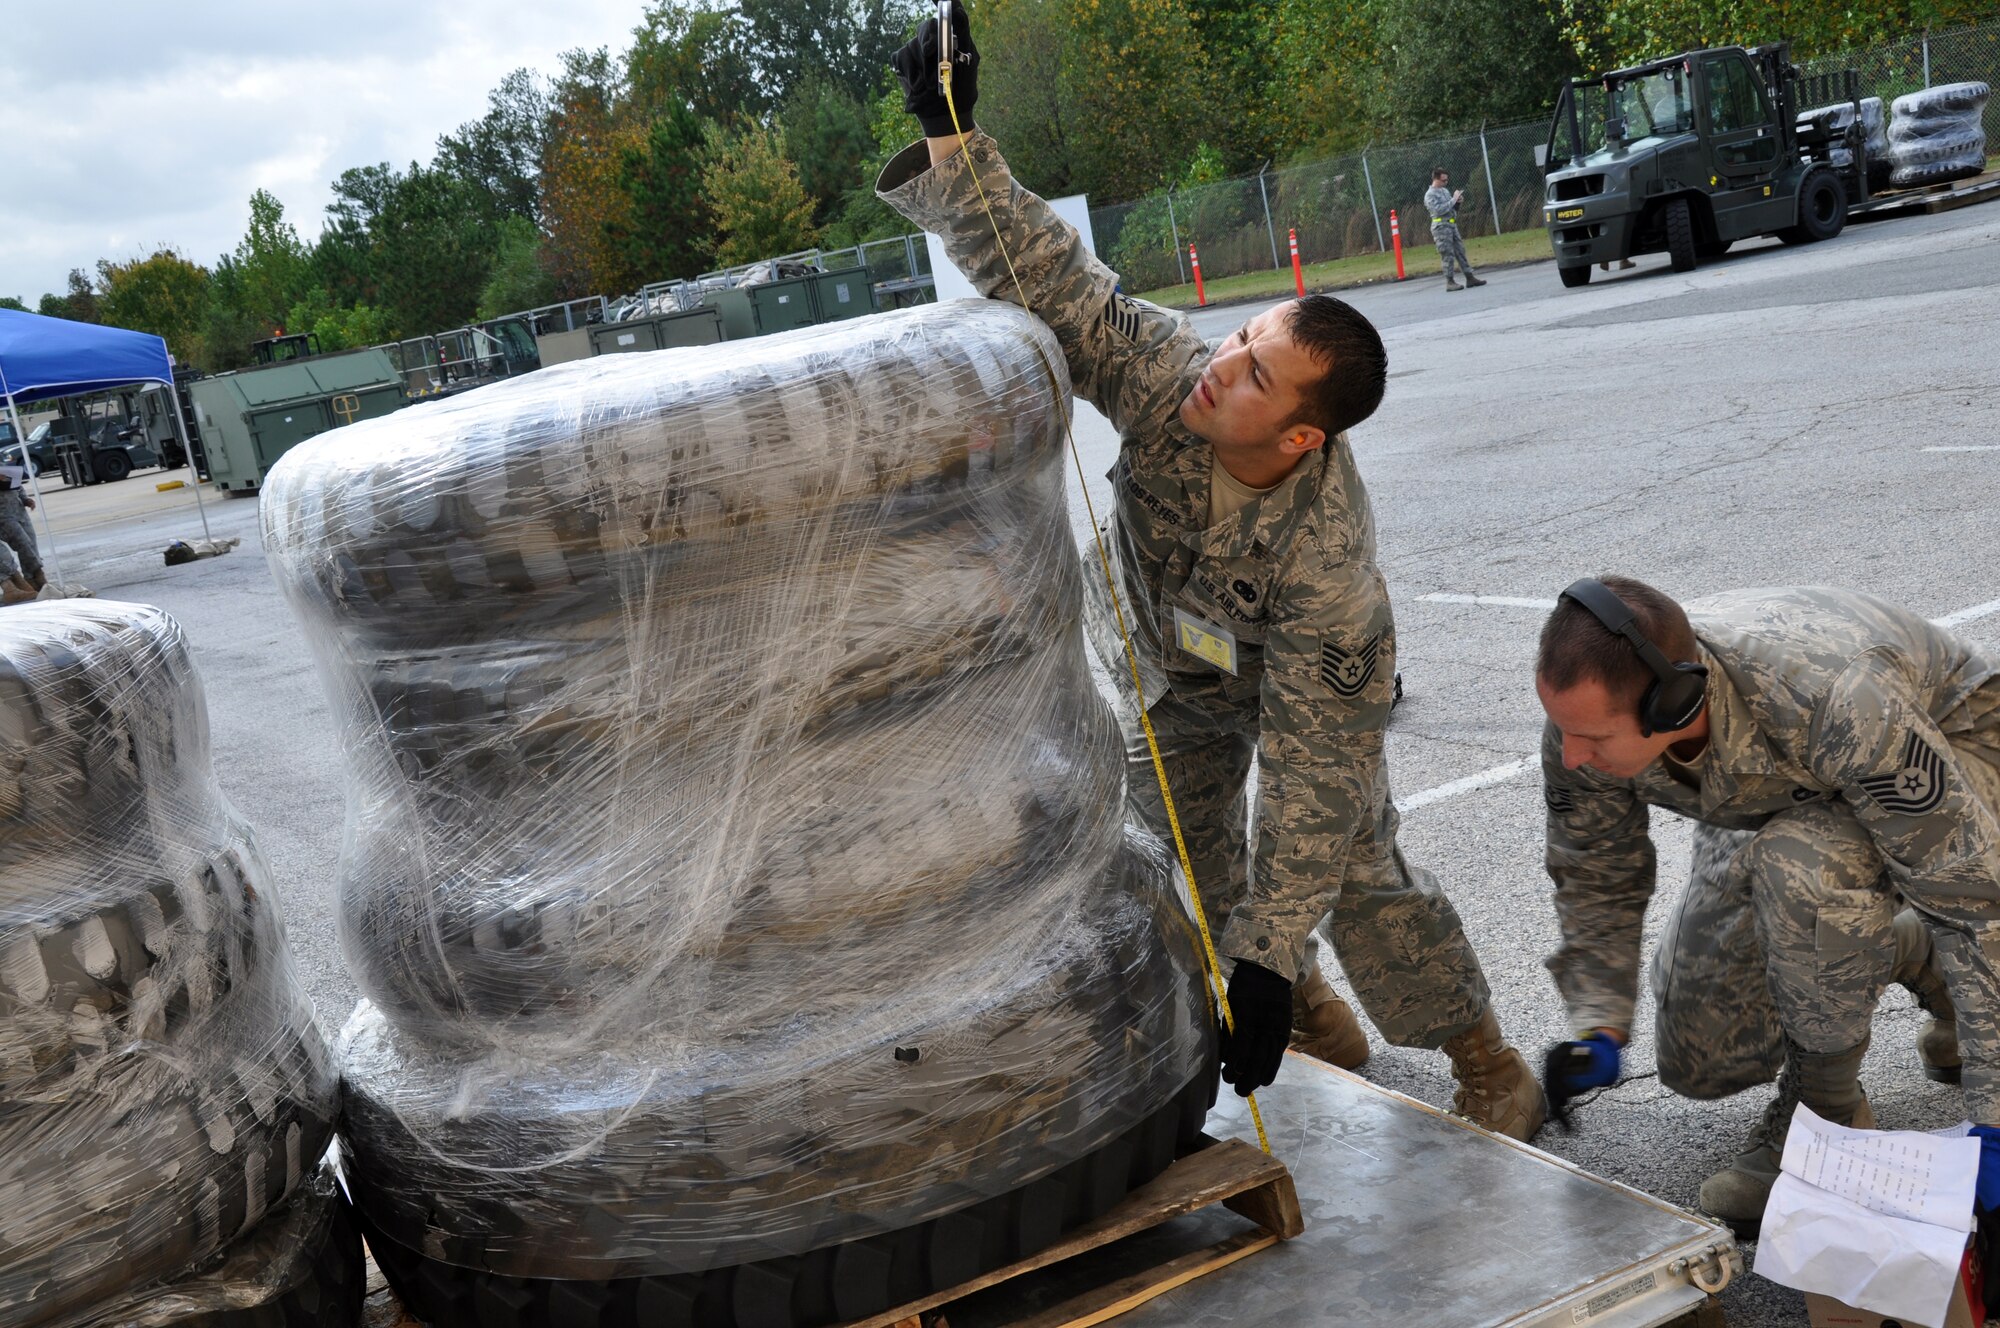 Tech. Sgt. Cody De Los Reyes and Tech. Sgt. Justin Adams, 67th Aerial Port Squadron, measure the height of a pallet stocked with tires during the pallet-building event at AFRC's Port Dawg Challenge Oct. 26. (U.S. Air Force photo/Bryan Magaña)